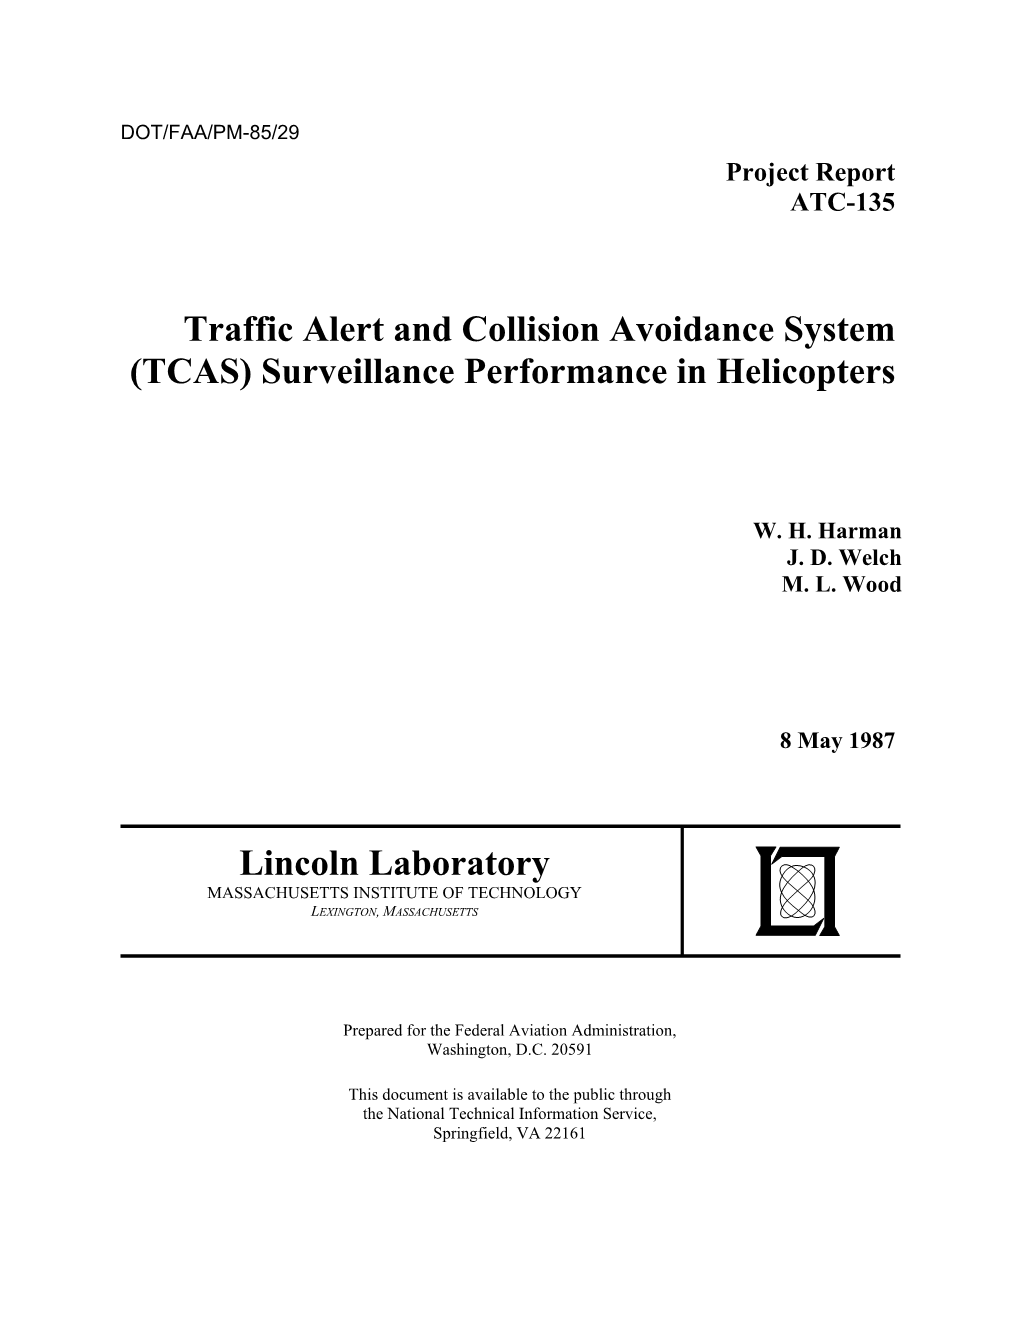 Traffic Alert and Collision Avoidance System (TCAS) Surveillance Performance in Helicopters